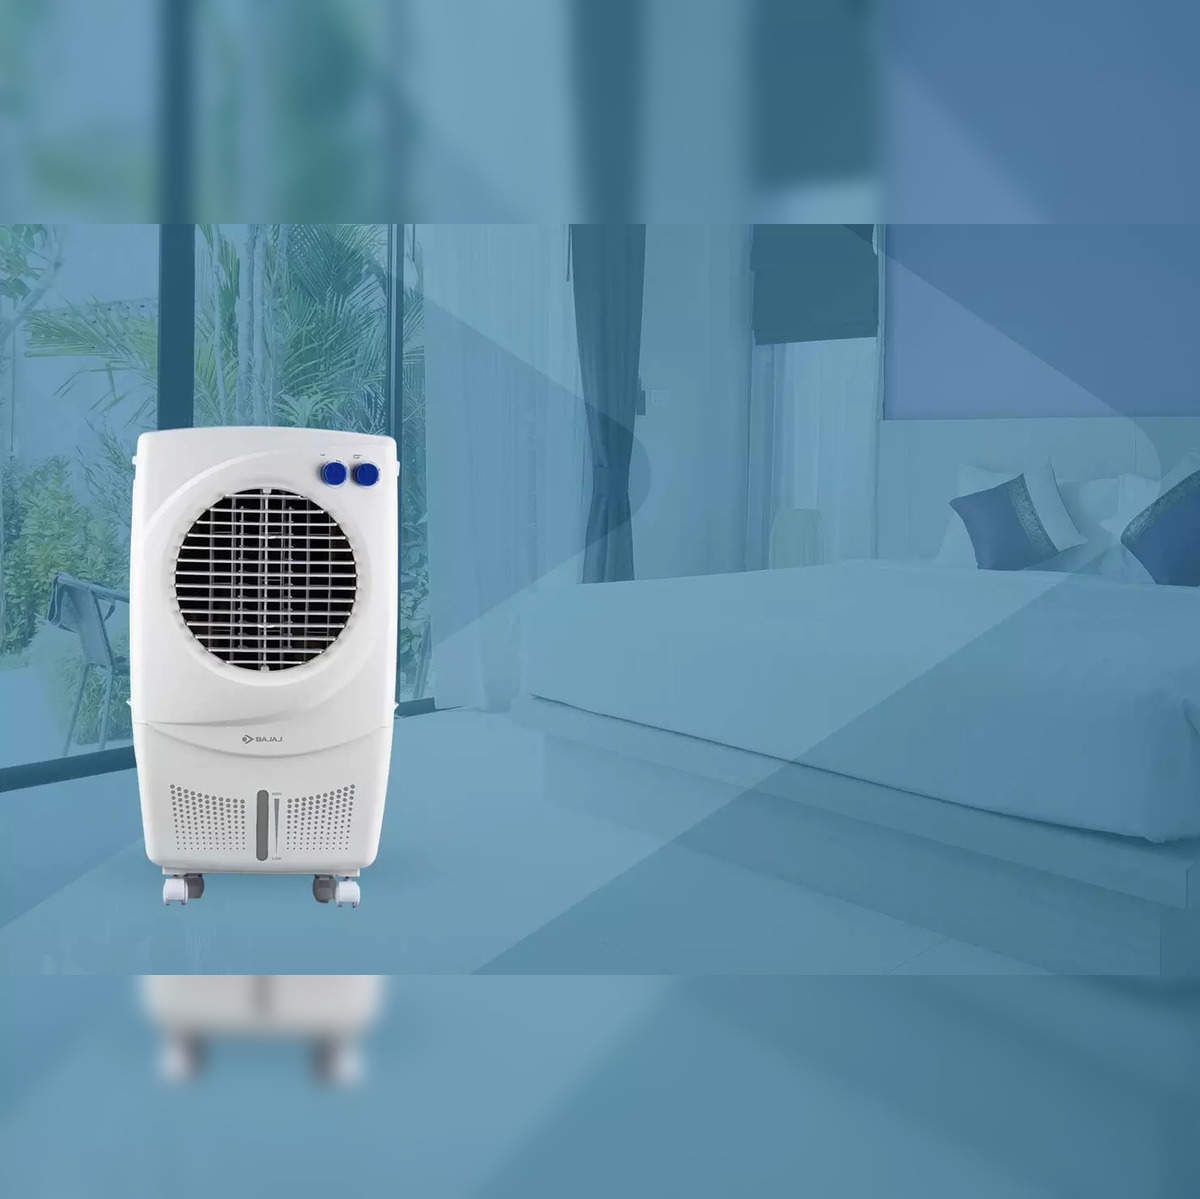 Best portable fans, air conditioners to prepare for warm weather